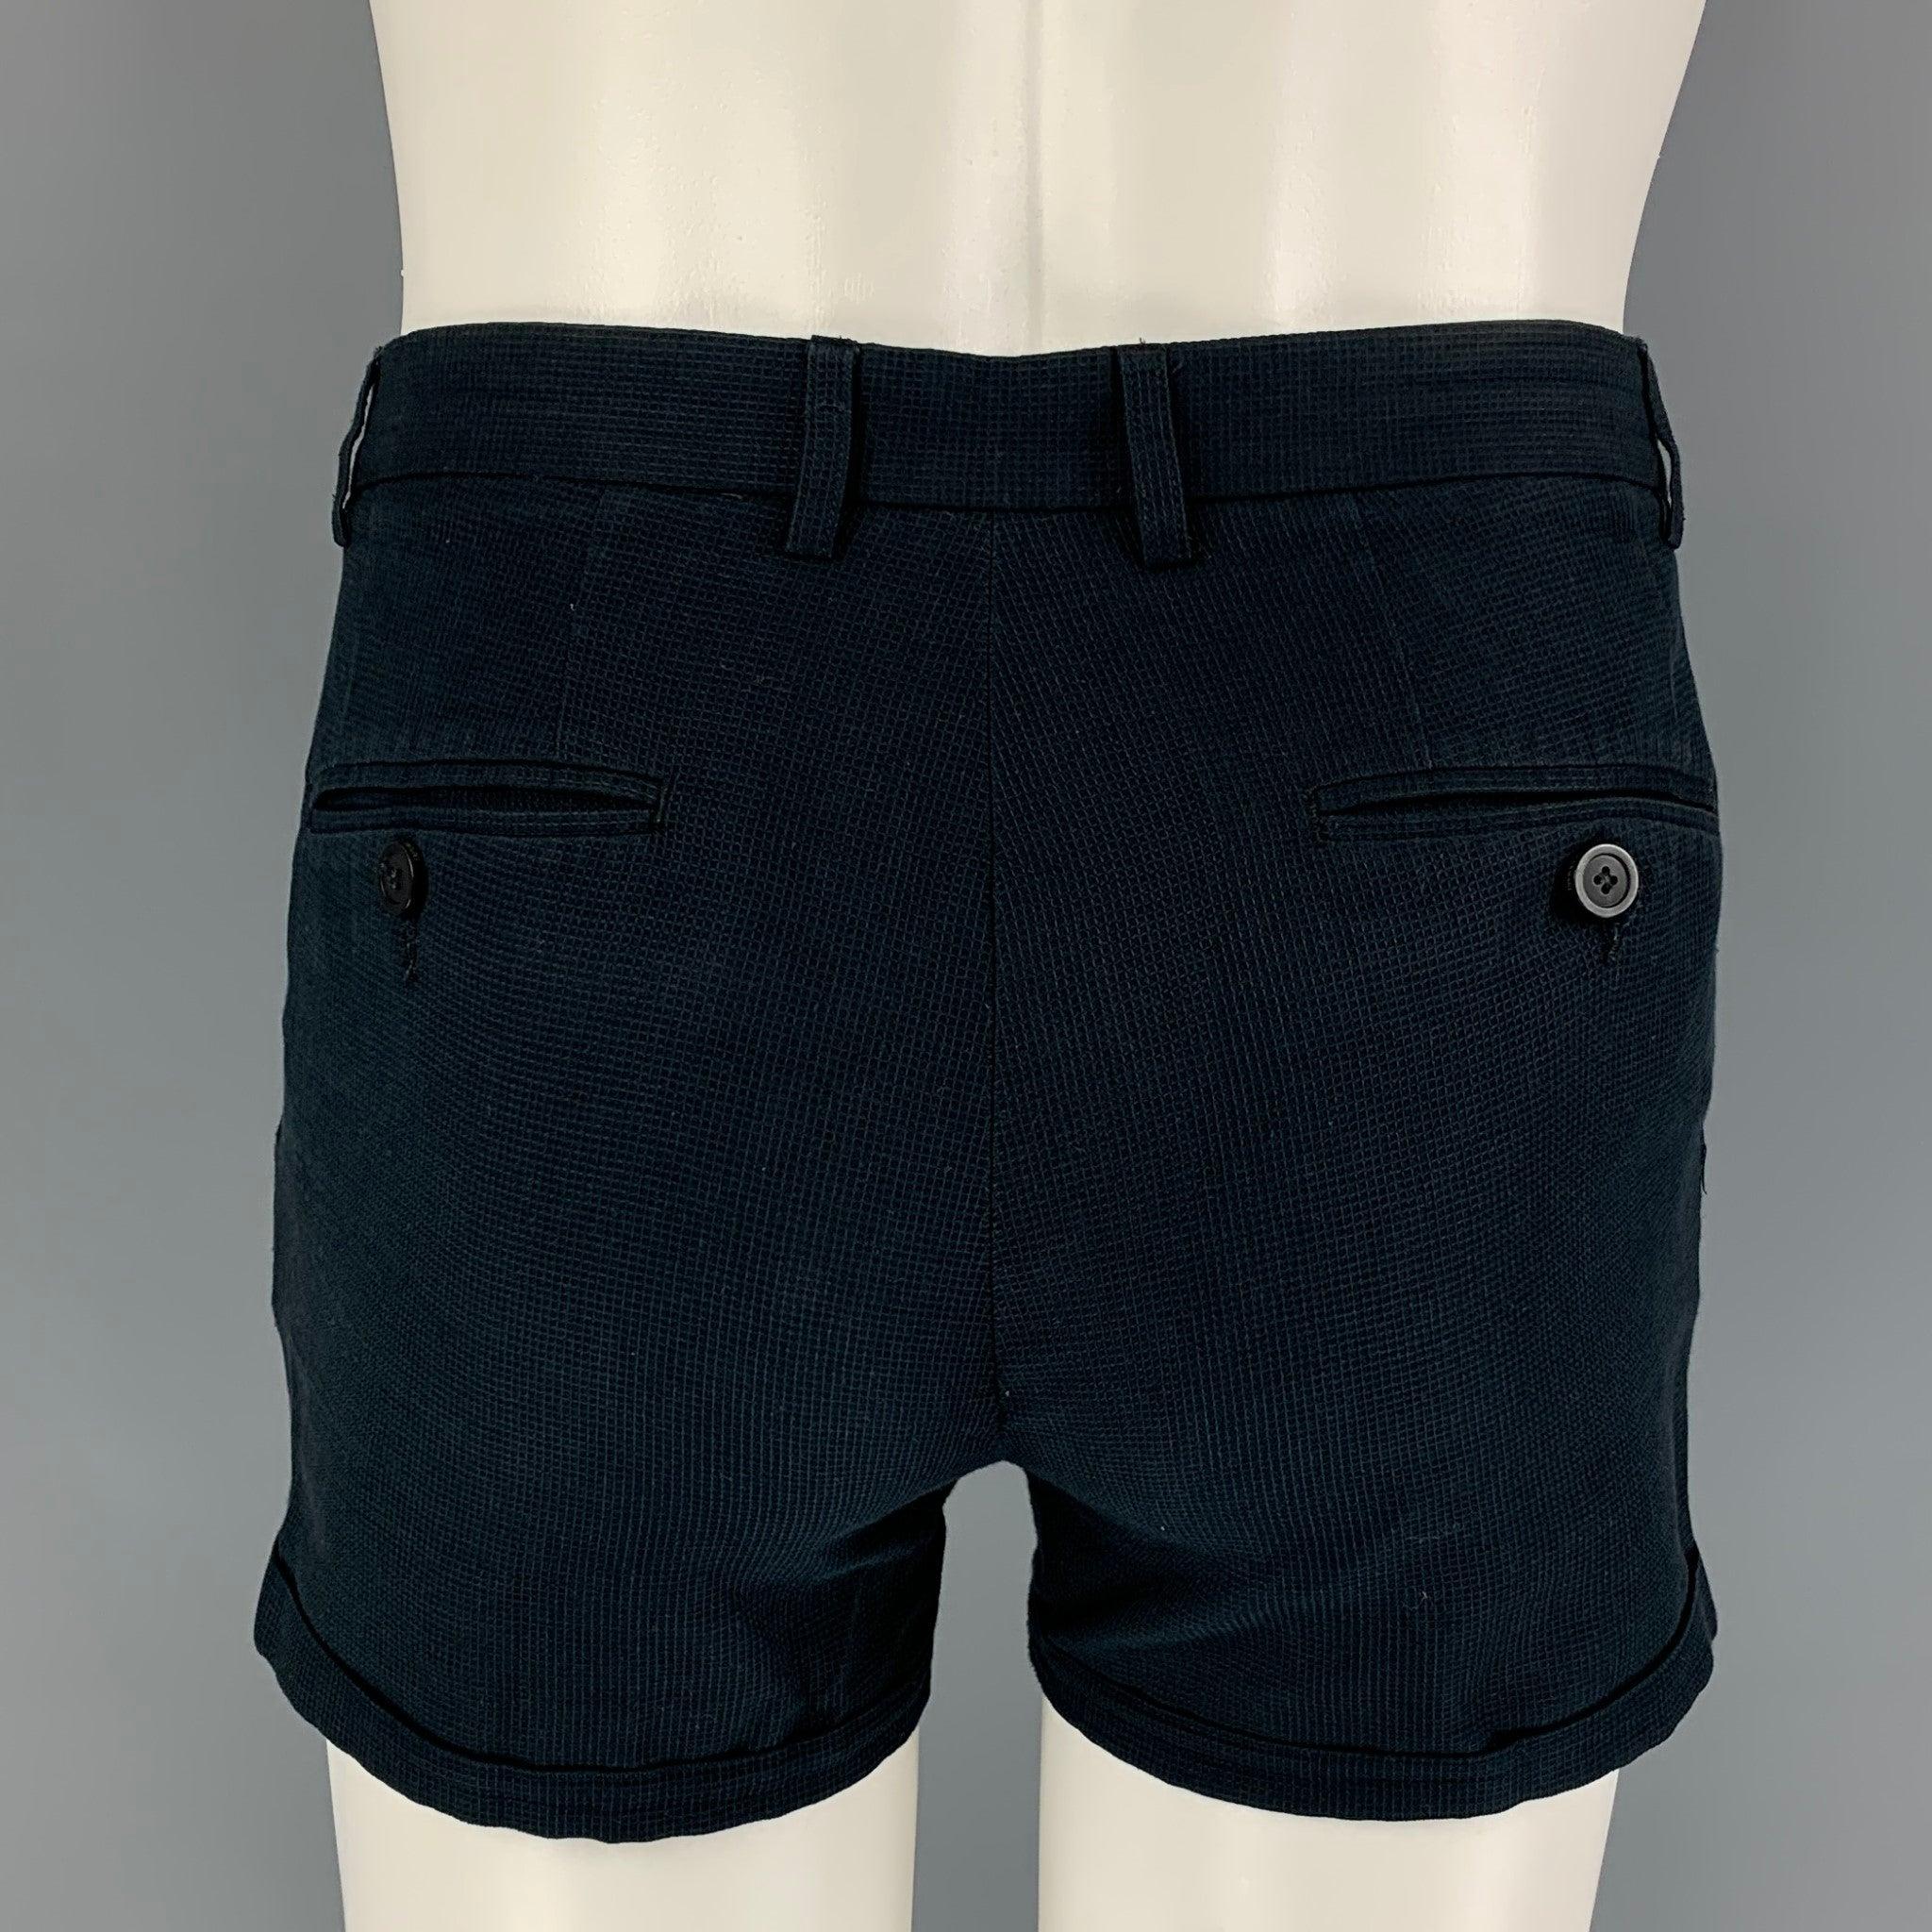 EMPORIO ARMANI 'Robert Line' shorts comes in a navy textured cotton featuring a mini style, cuffed, and a zip fly closure.
Good
Pre-Owned Condition. Light wear. As-Is. 

Marked:   46 

Measurements: 
  Waist: 30 inches  Rise: 9.5 inches  Inseam: 3